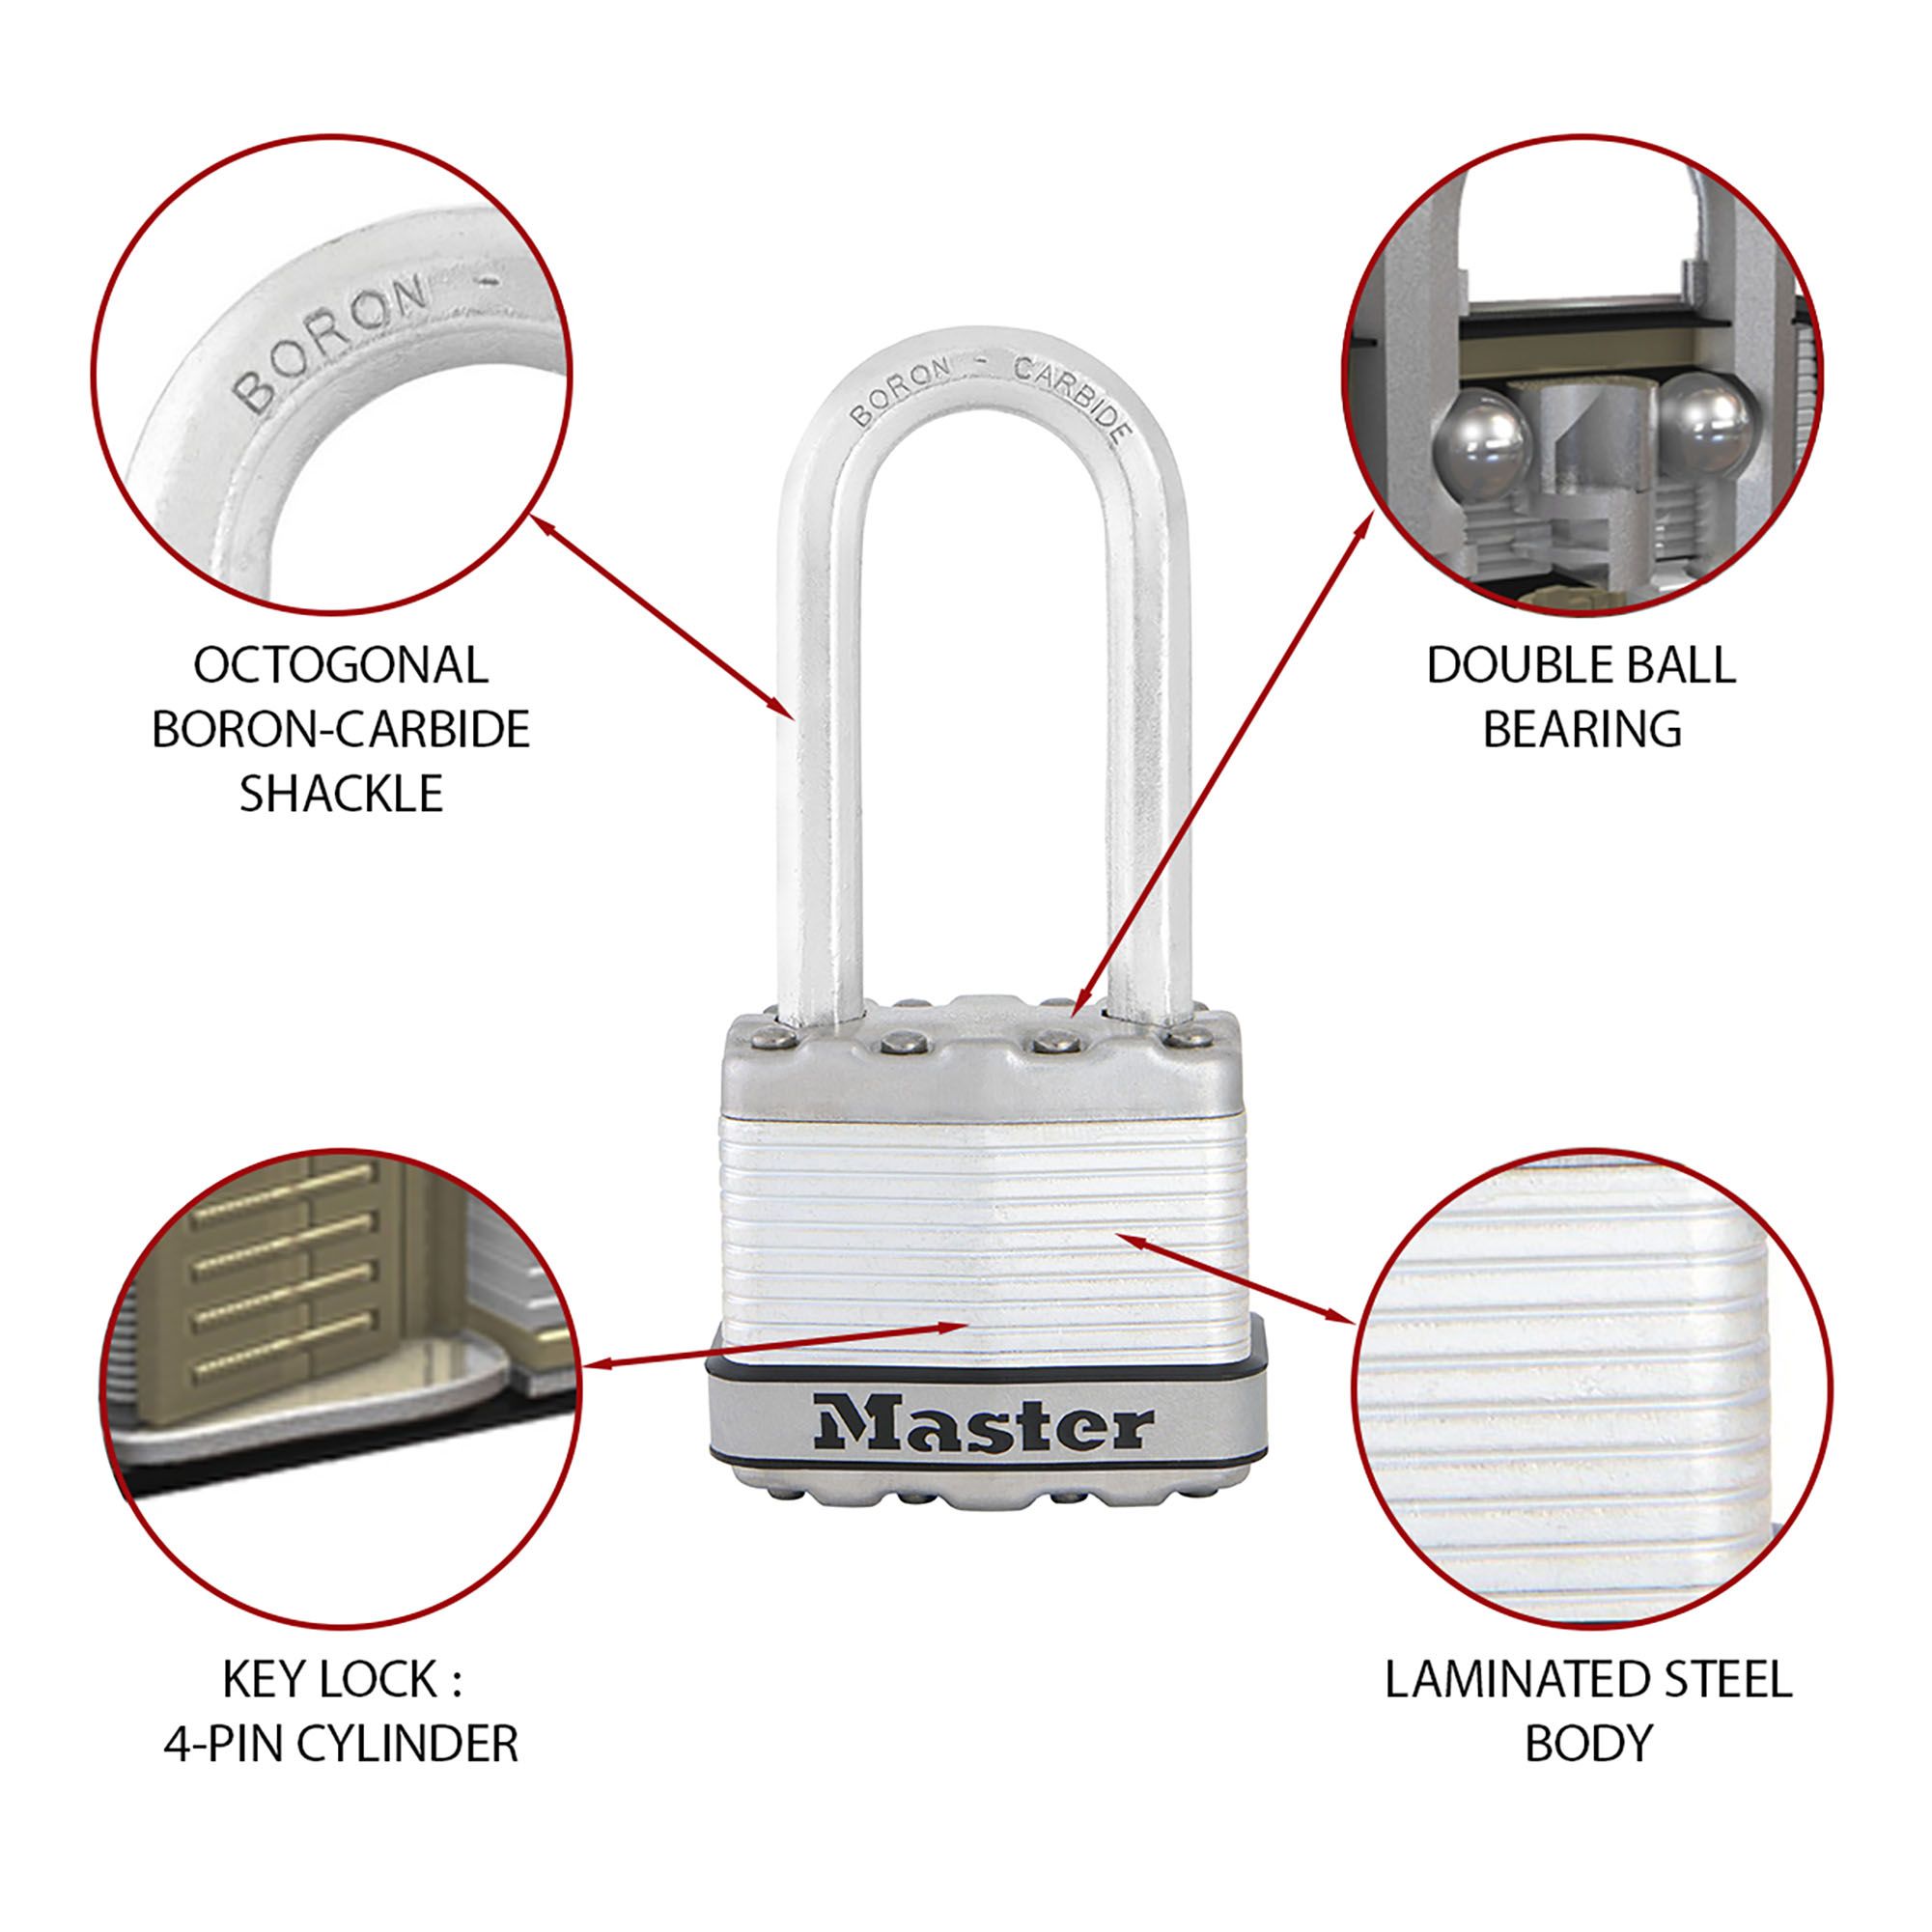 Master Lock Excell Heavy duty Laminated Steel Long shackle Padlock (W)45mm